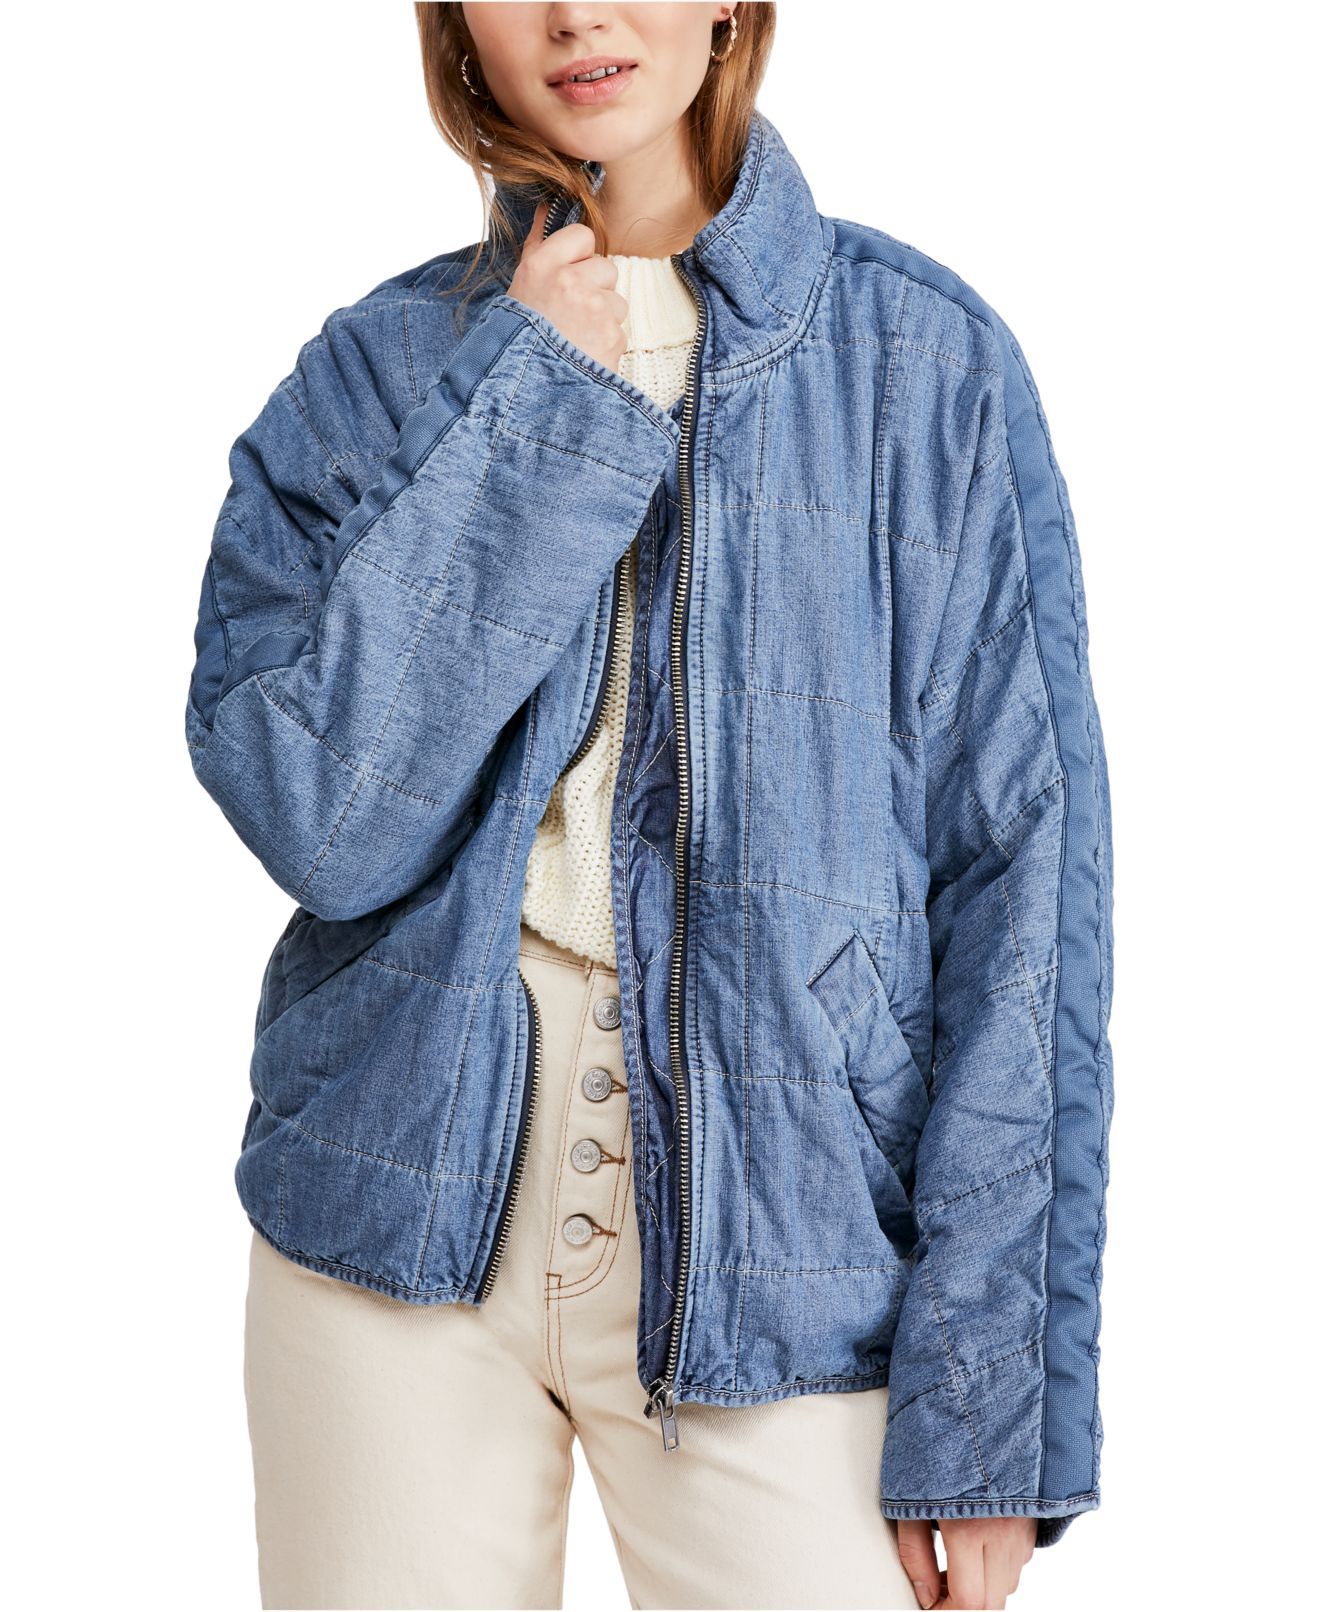 Color: Blues Size Type: Regular Size (Women's): L Type: Jacket Style: Quilted Outer Shell Material: 100% Cotton